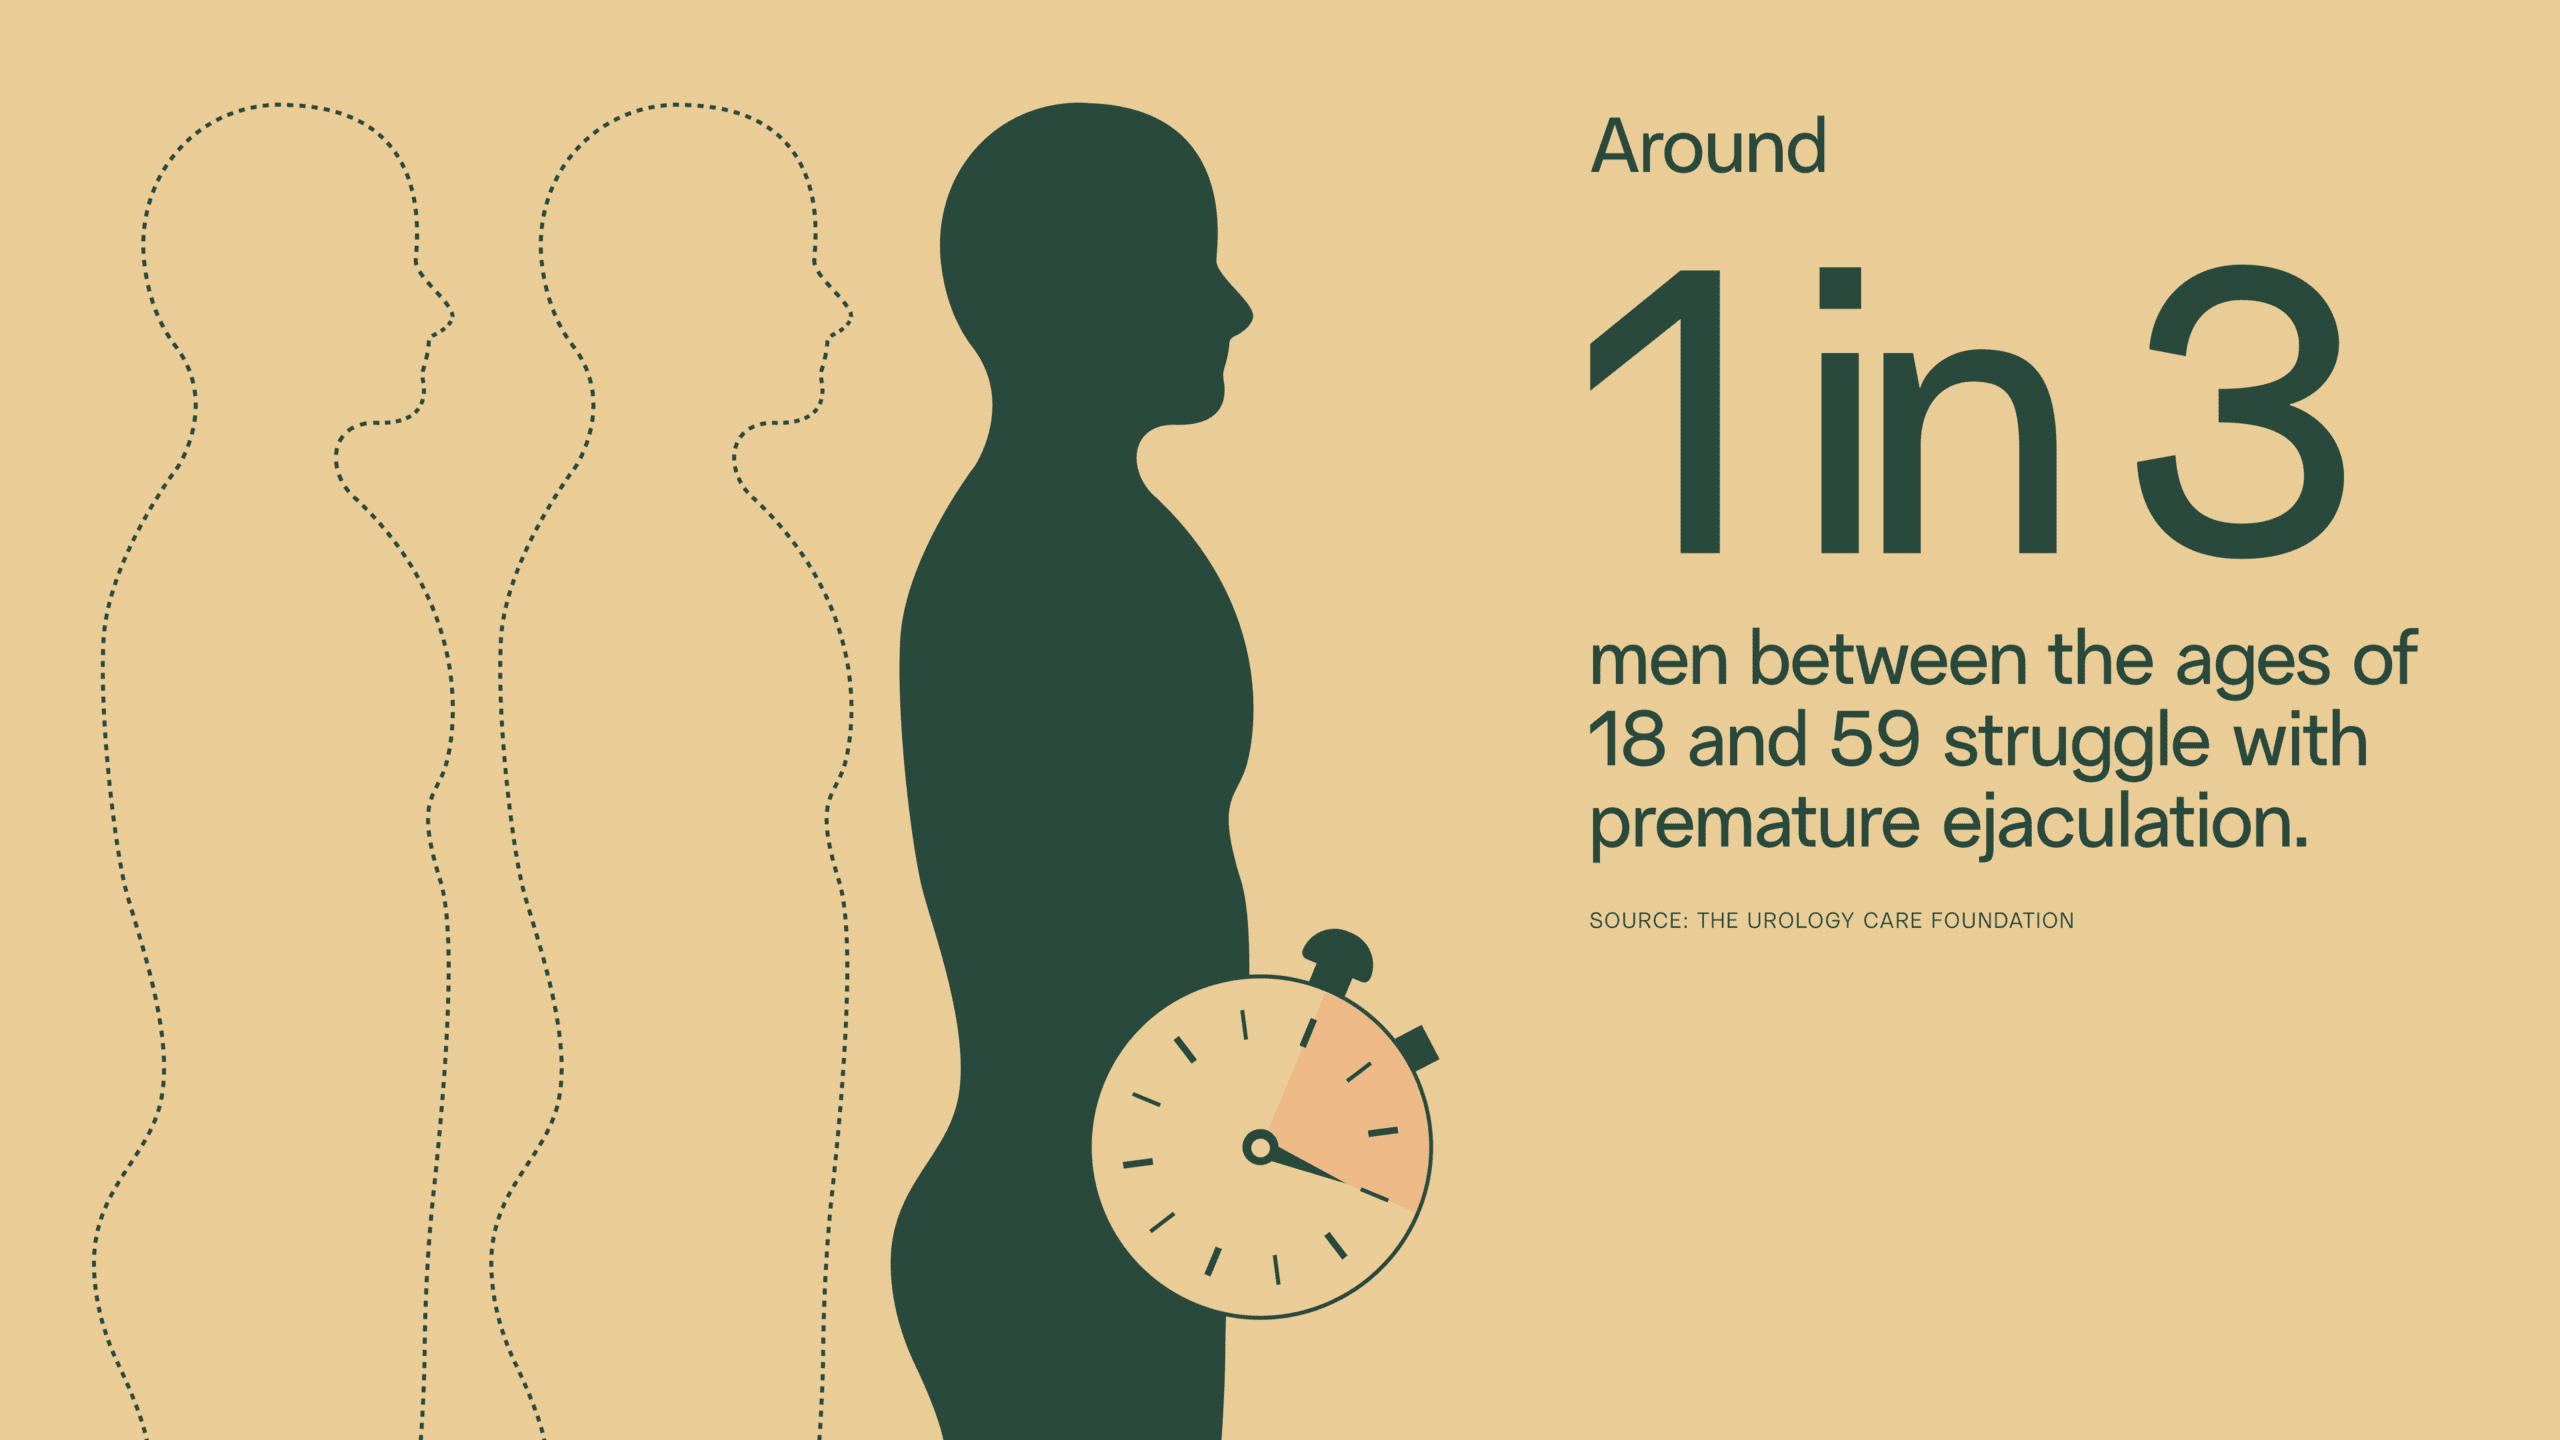 Around 1 in 3 men between the ages of 18 and 59 struggle with premature ejaculation.